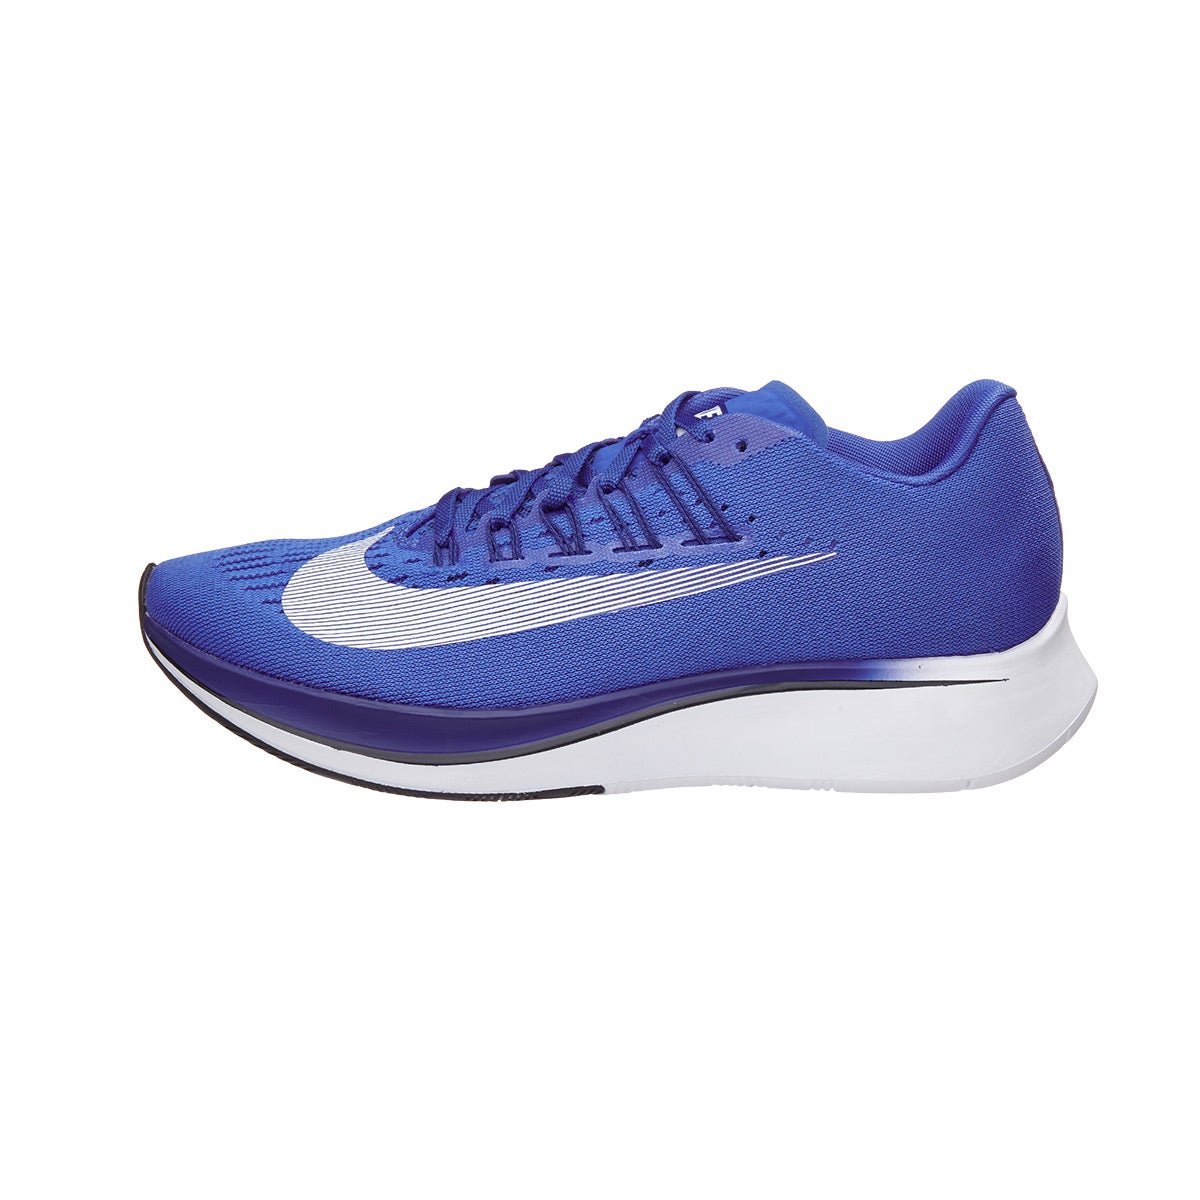 Nike Zoom Fly Women's Shoes Hyper Royal/White/Royal 360° View | Running ...